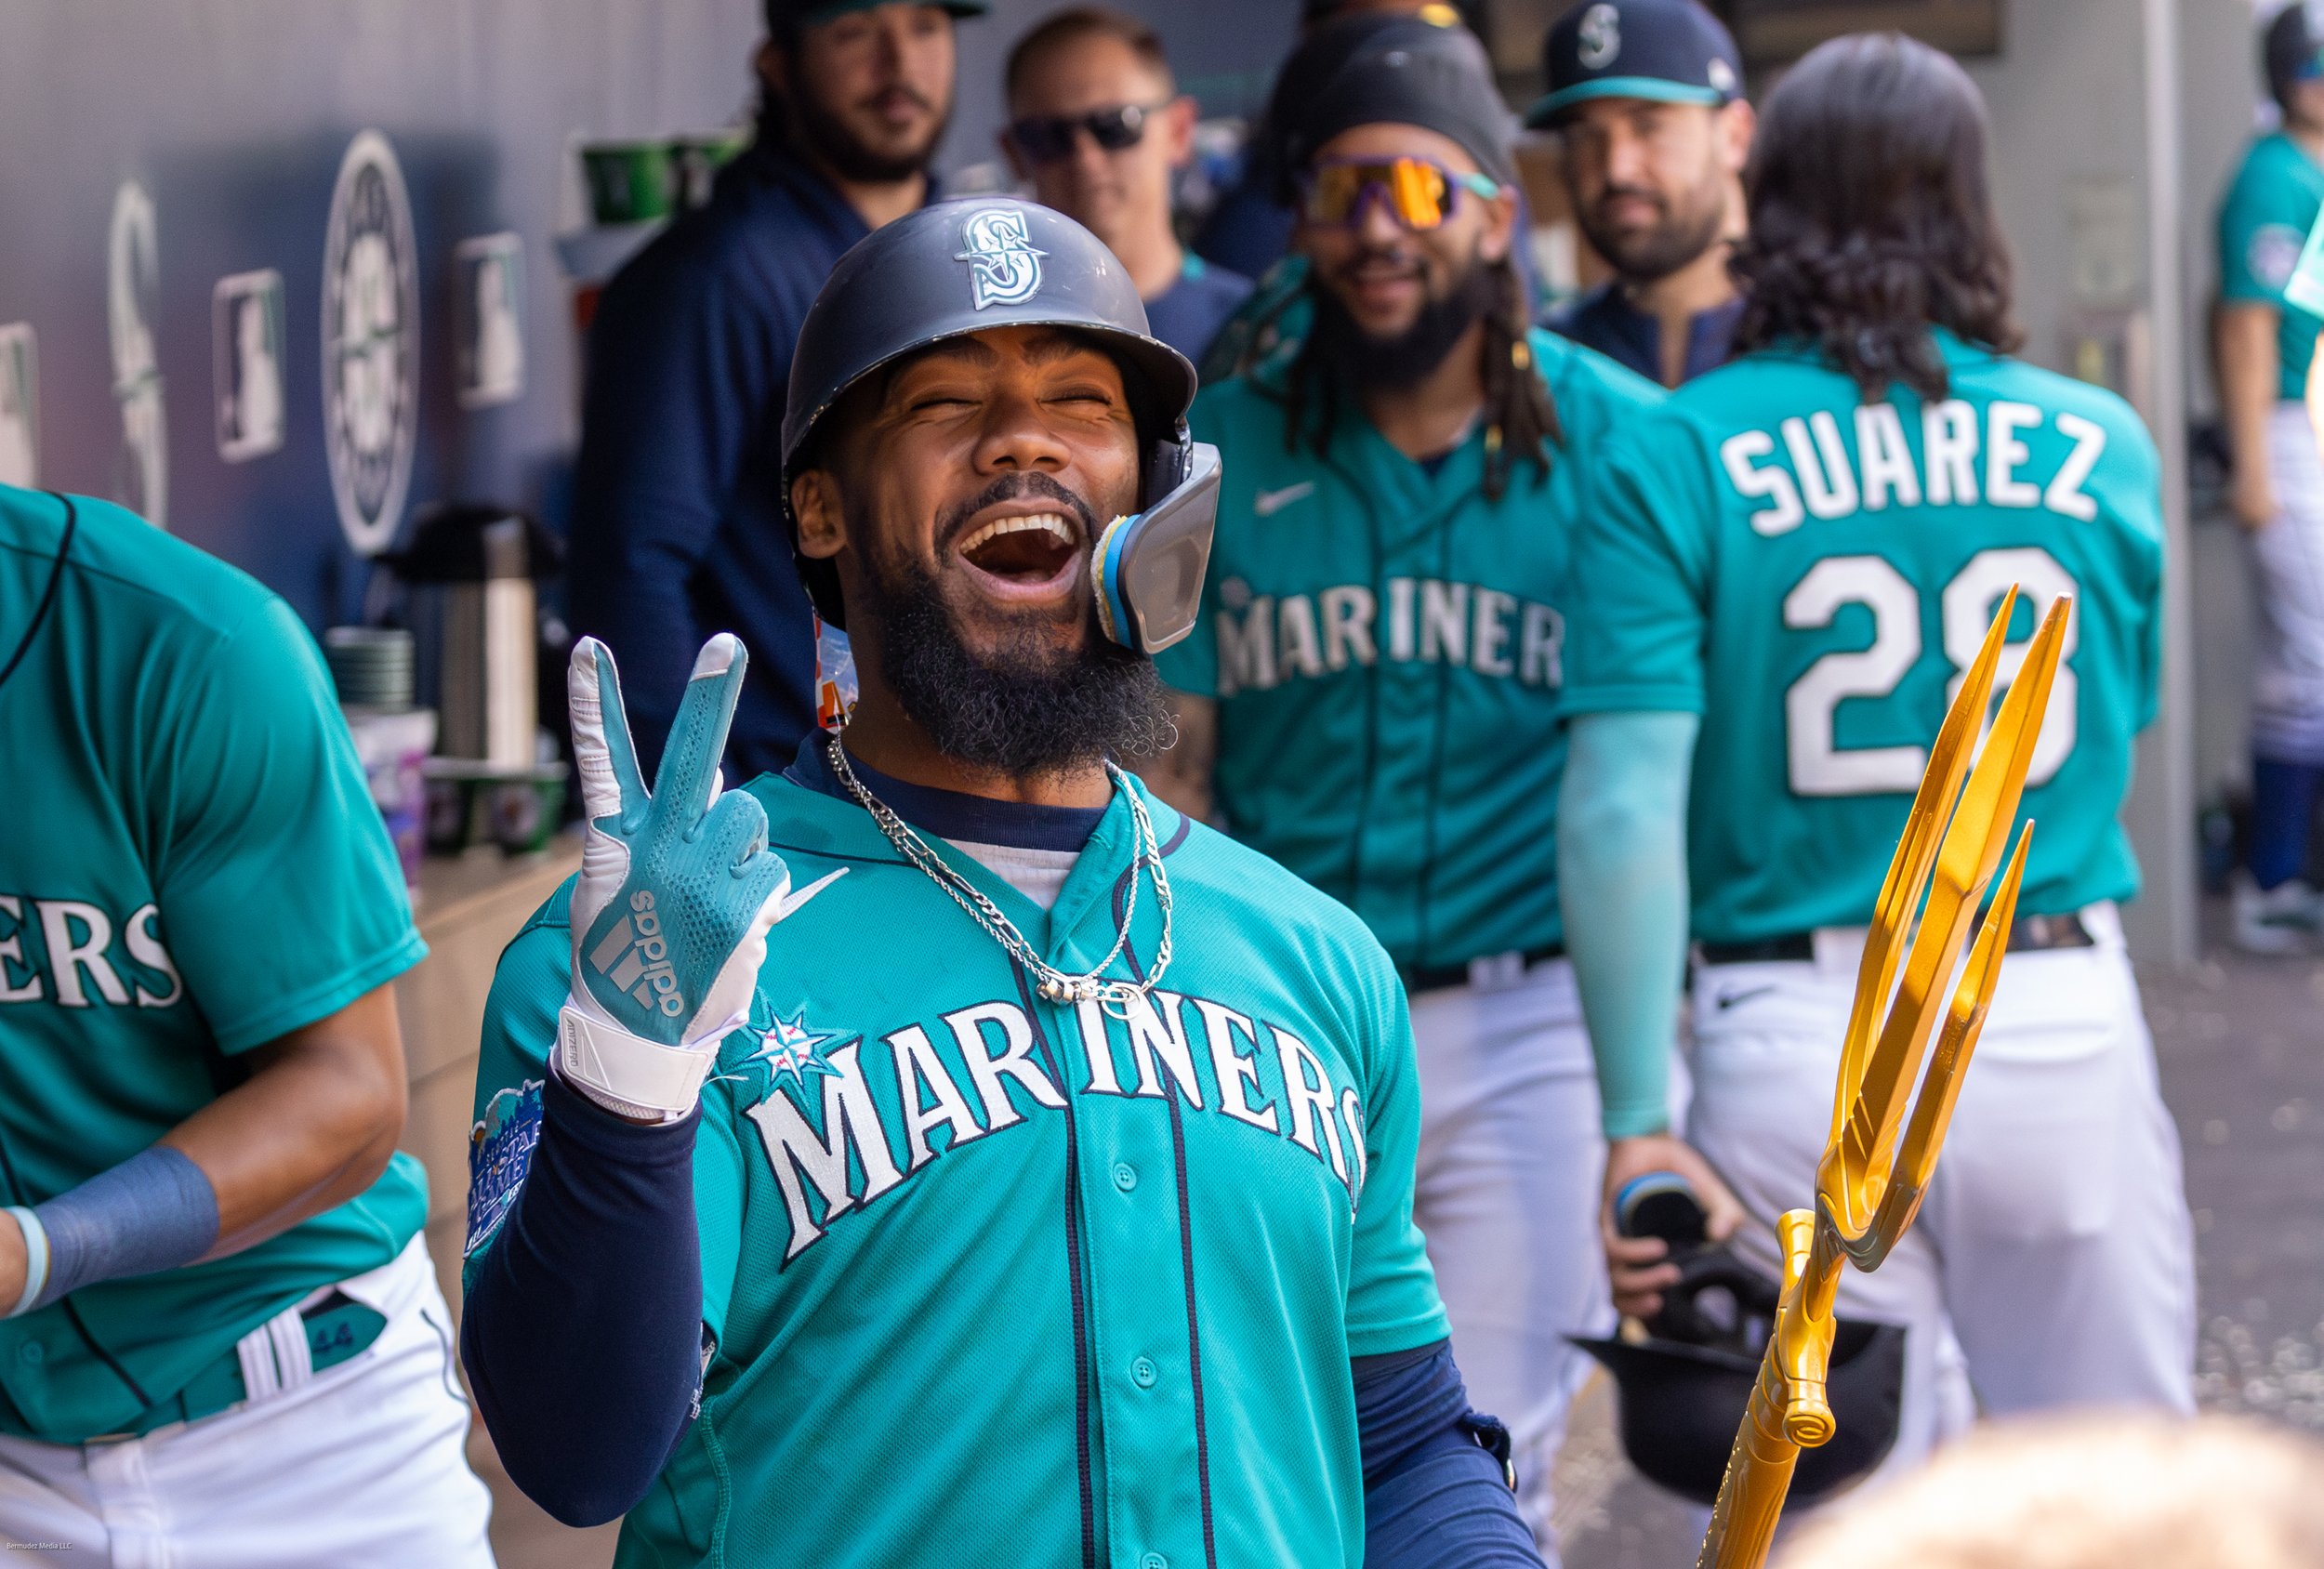 Royal beat down in Seattle; Mariners franchise-record 7 dingers